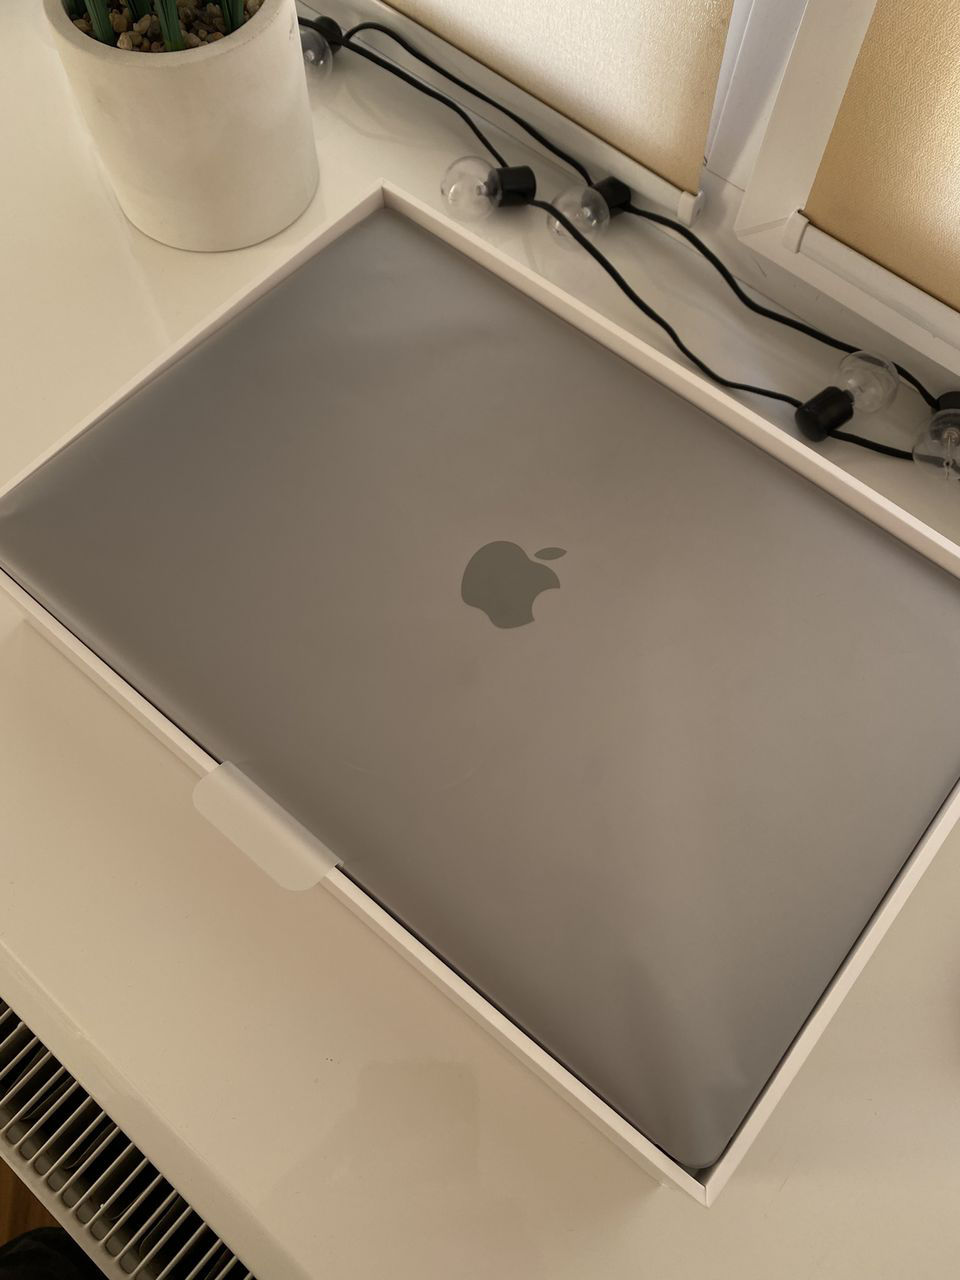 Apple macbook air camera which manager gives the following advice about getting a pay rise